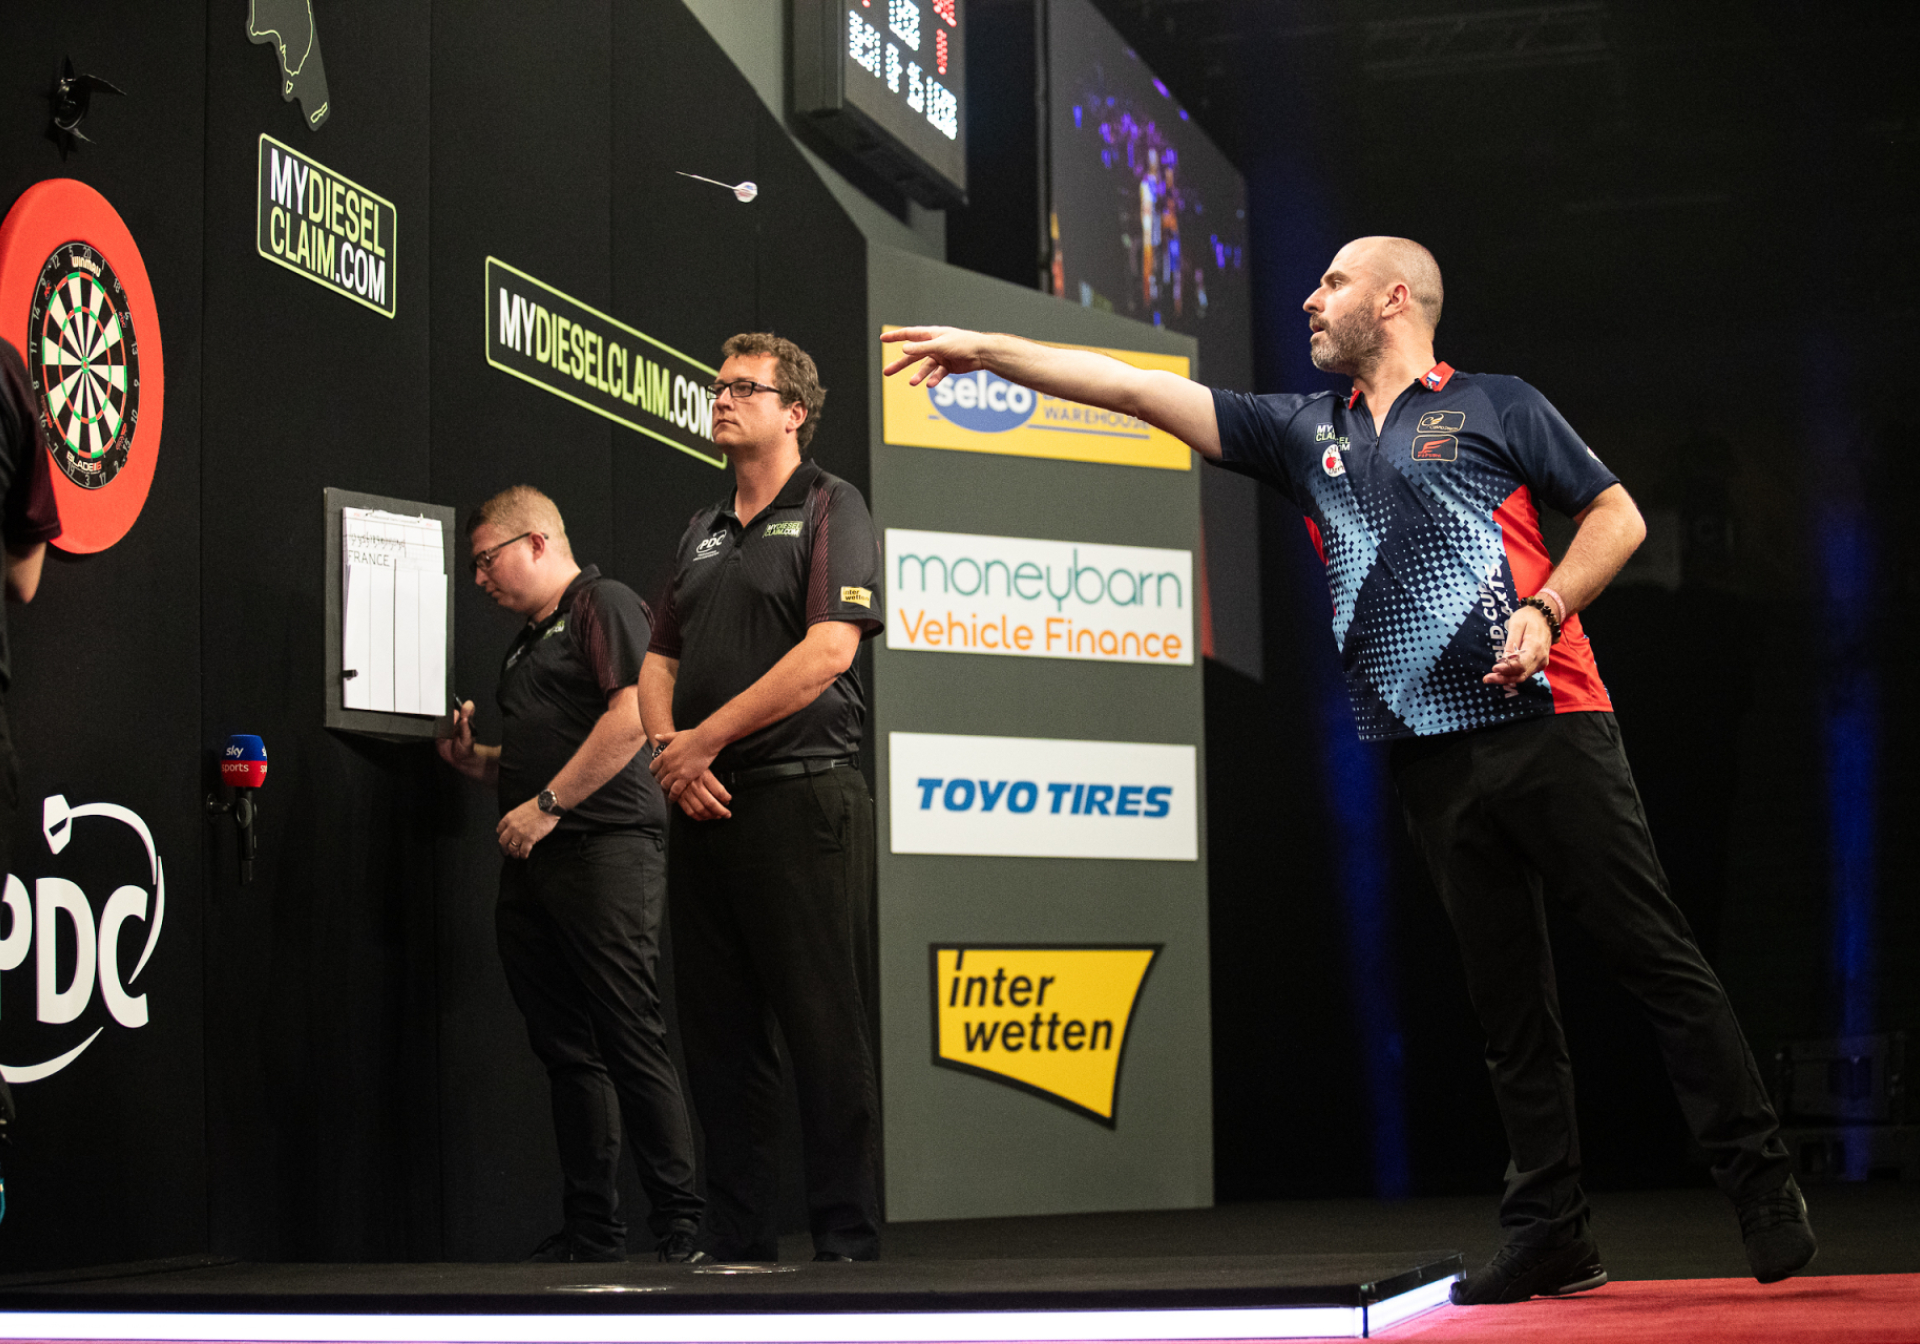 France - My Diesel Claim World Cup of Darts (Jonas Hunold, PDC)